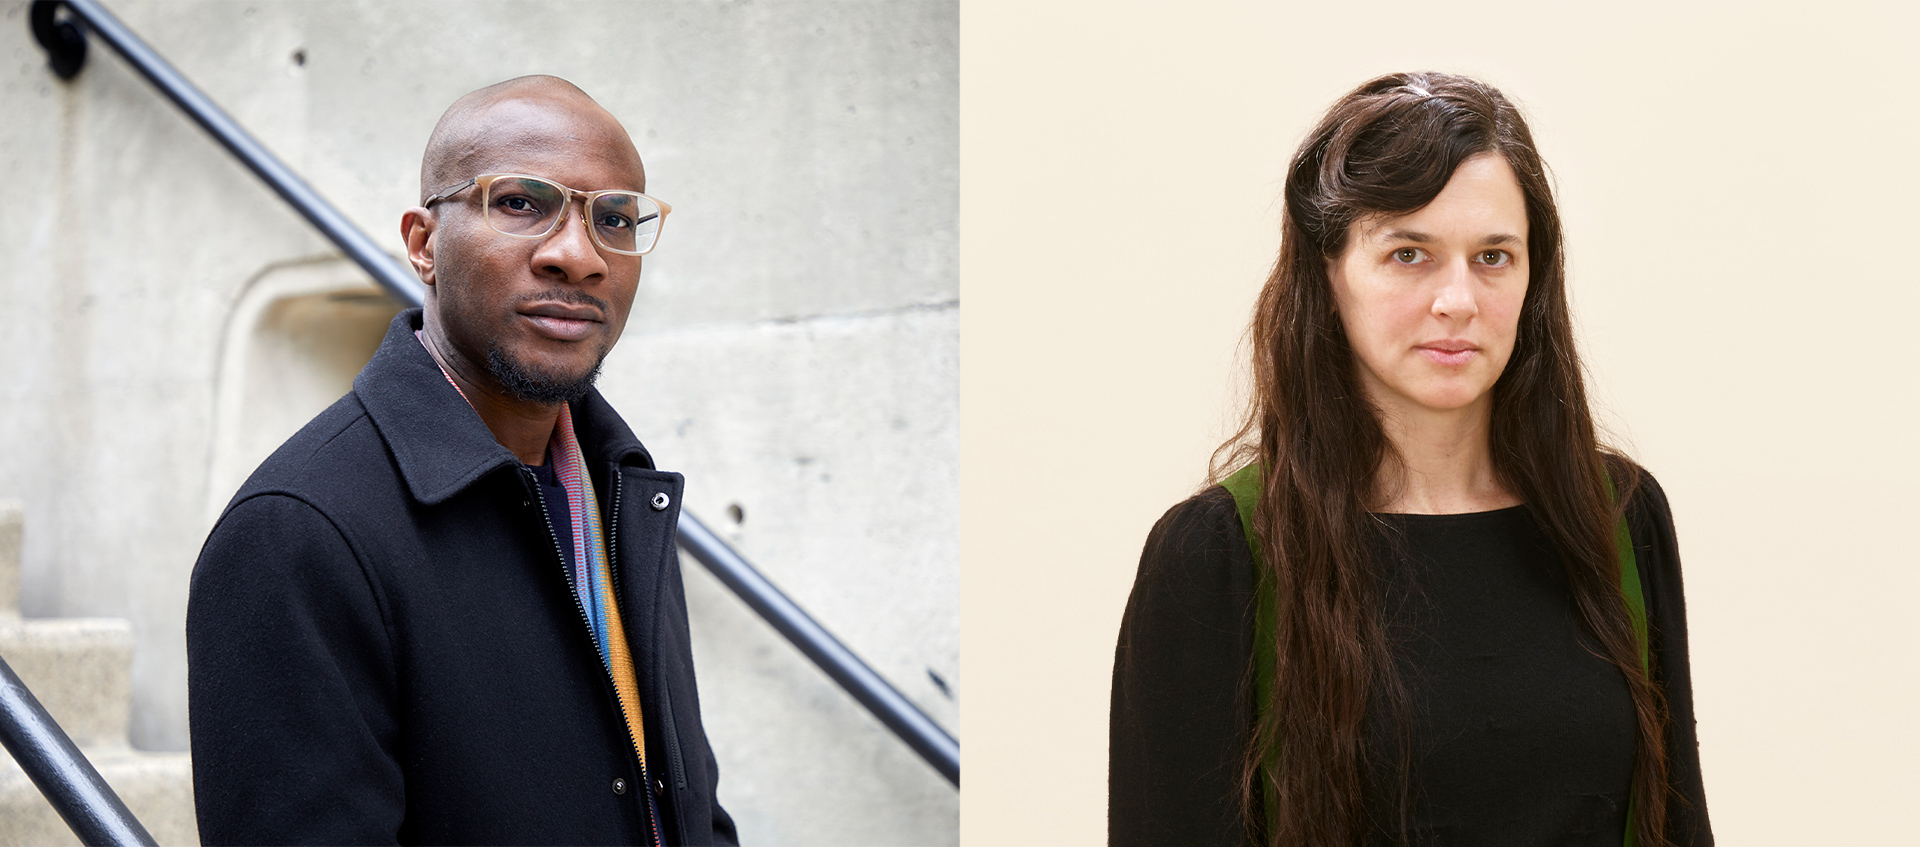 On the left a photo of Teju Cole standing in front of a stairwell, he is wearing eyeglasses and a black jacket. On the right a photo of Taryn Simon standing in front of a blank wall. She is wearing a black shirt.